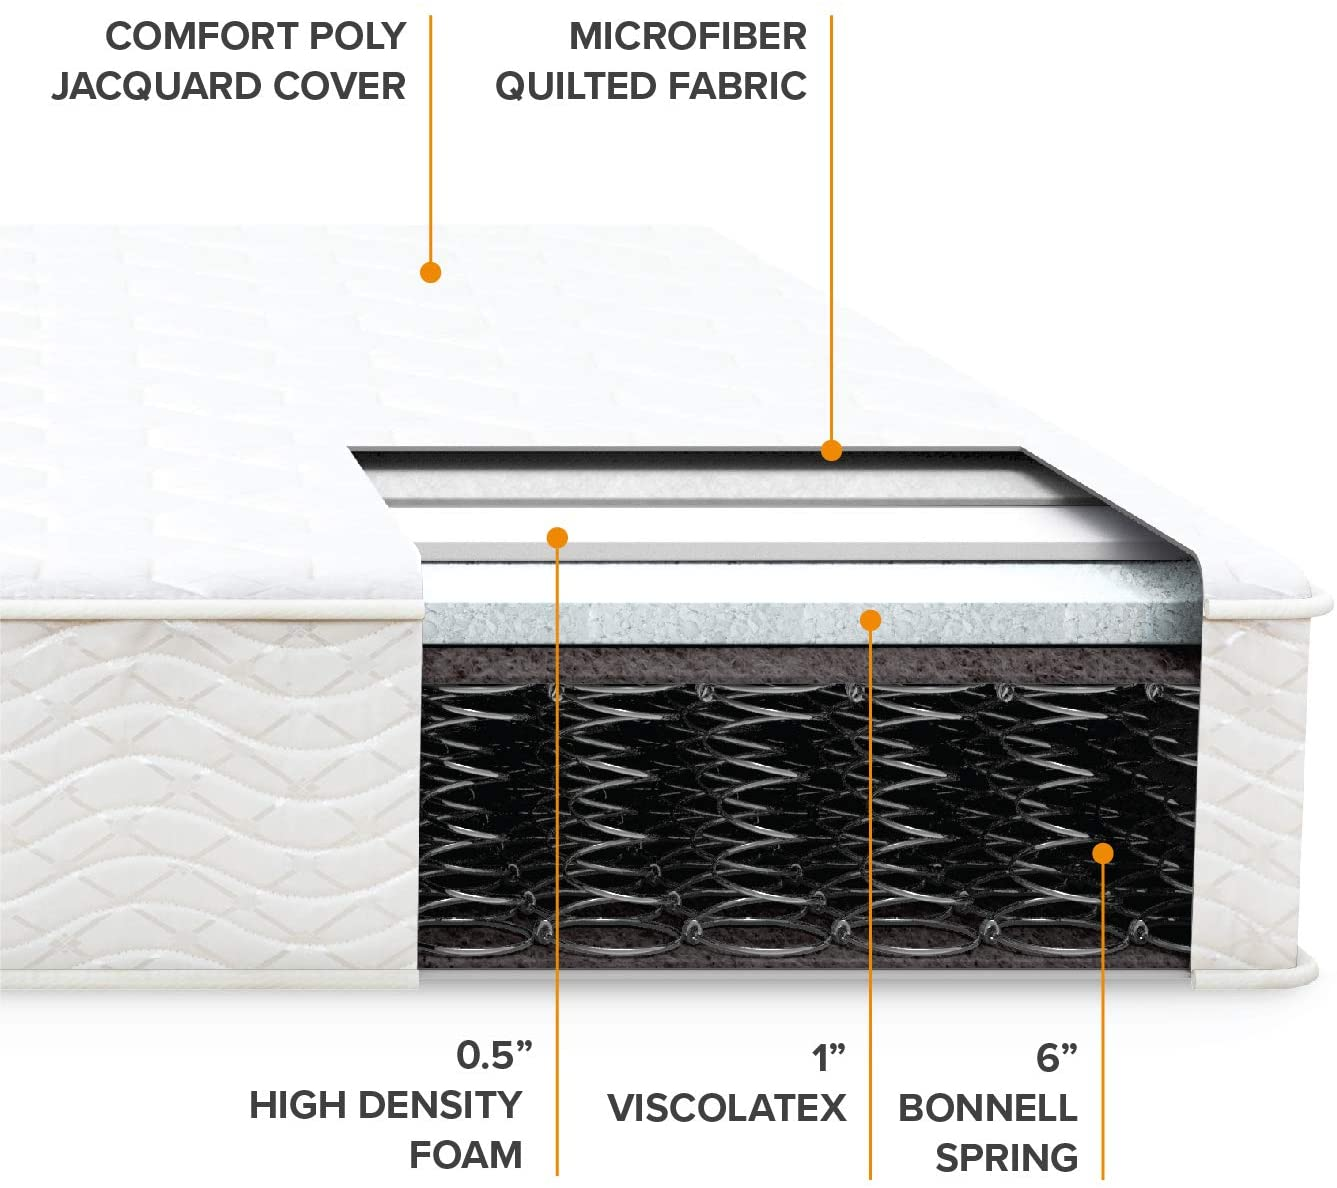 Innerspring mattresses like this offer freedom of movement, breathability and edge support.